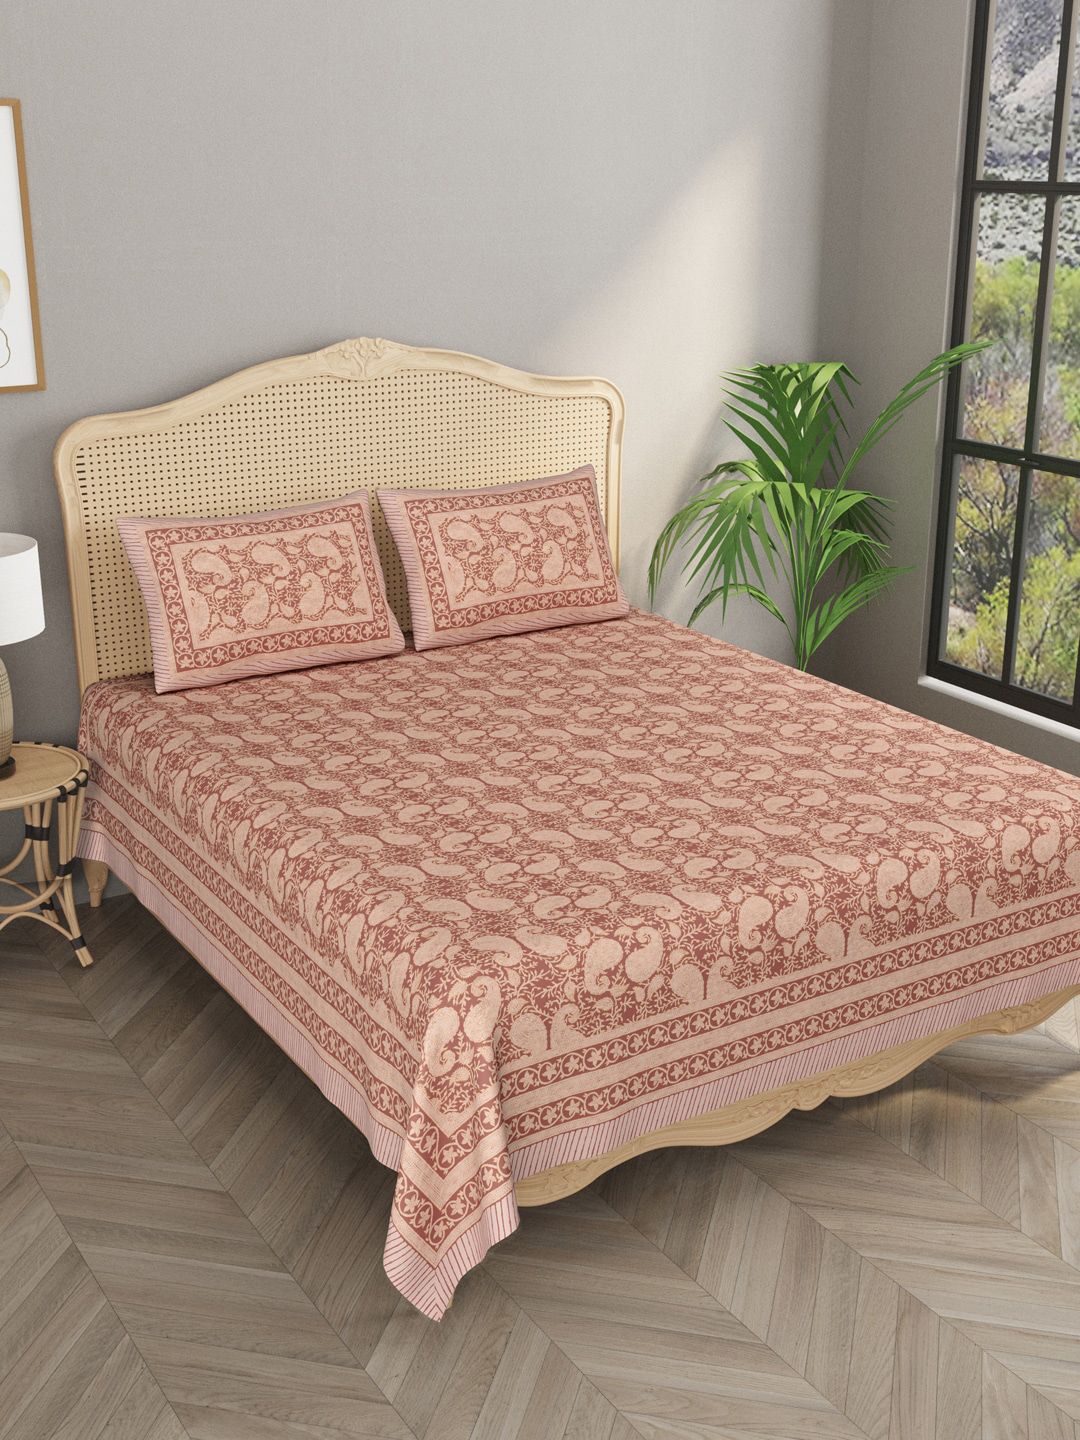 Gulaab Jaipur Brown Ethnic Motifs 400 TC King Bedsheet with 2 Pillow Cotton Covers Price in India